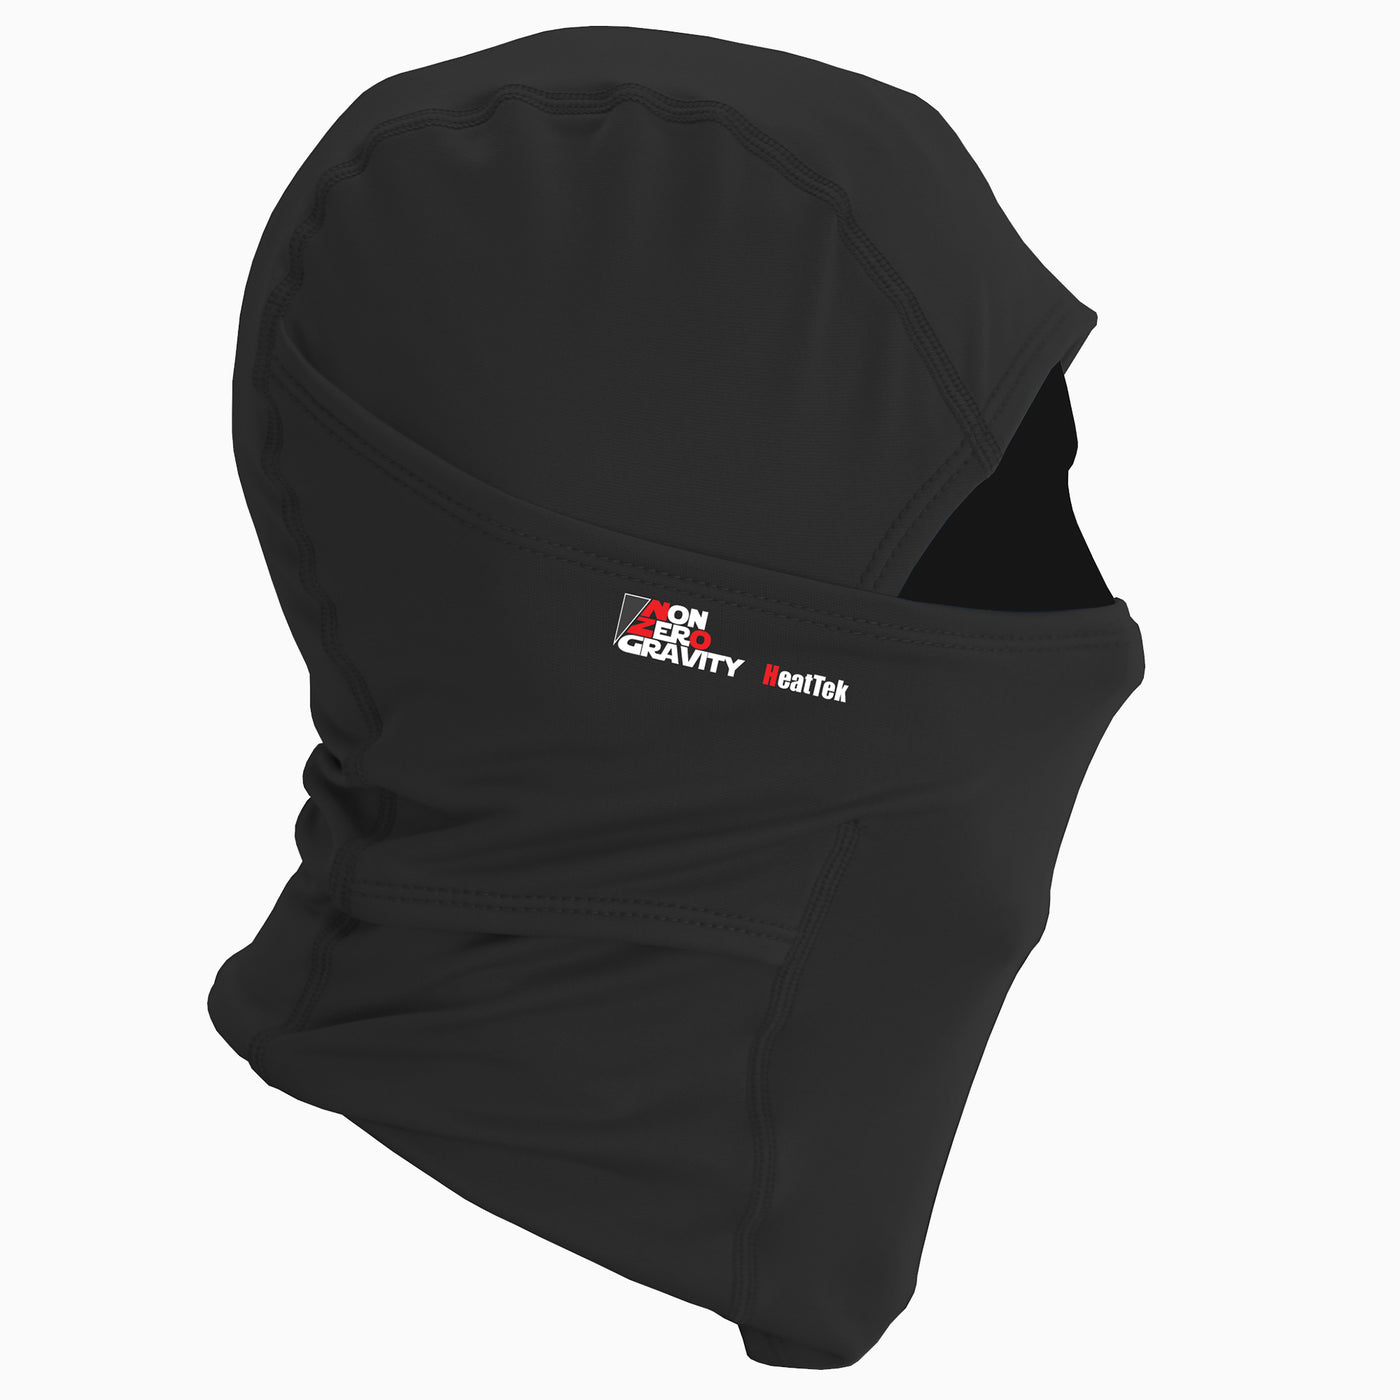 a black spandex athletic balaclava to mask and protect your face